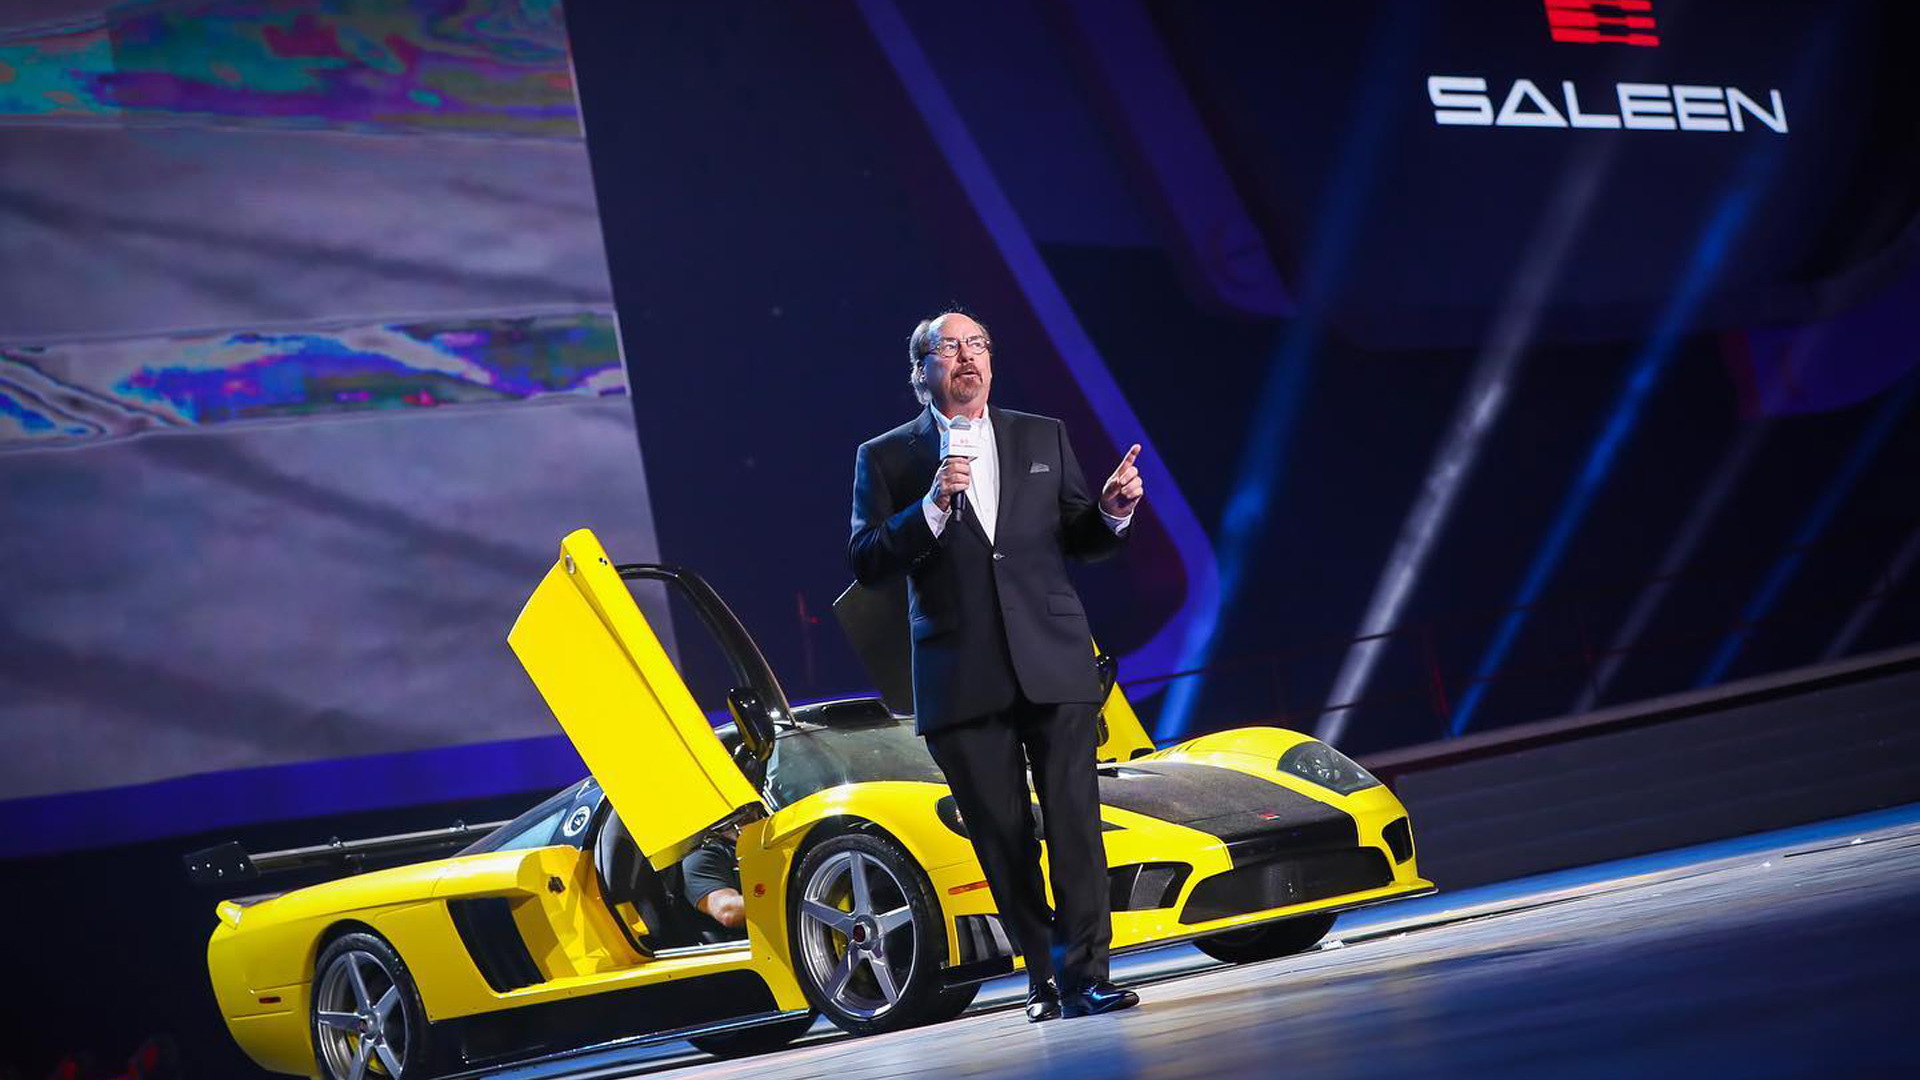 Steve Saleen at Saleen launch in China